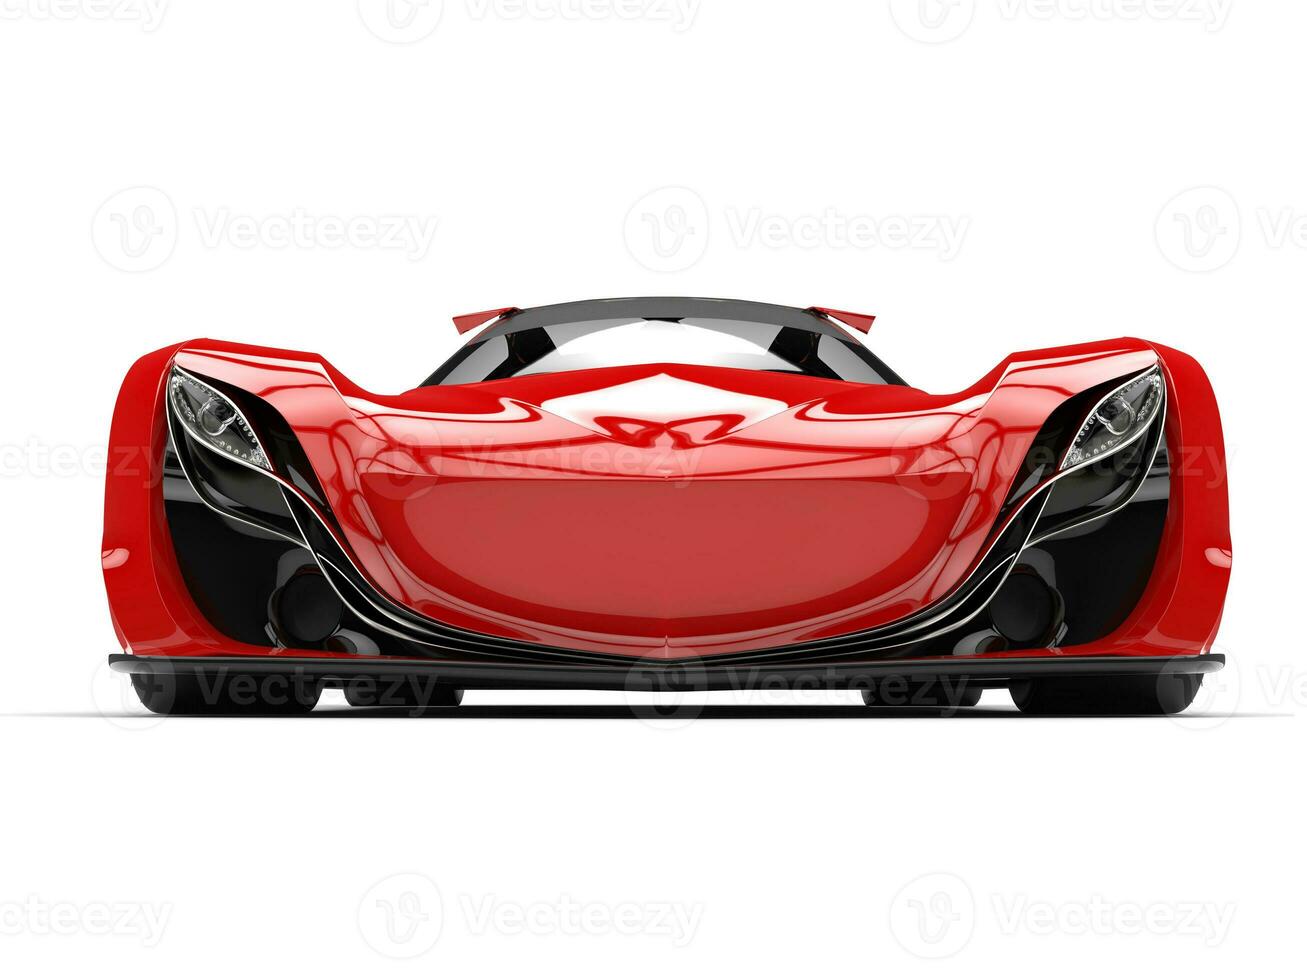 Scarlet red awesome race super car - front view photo